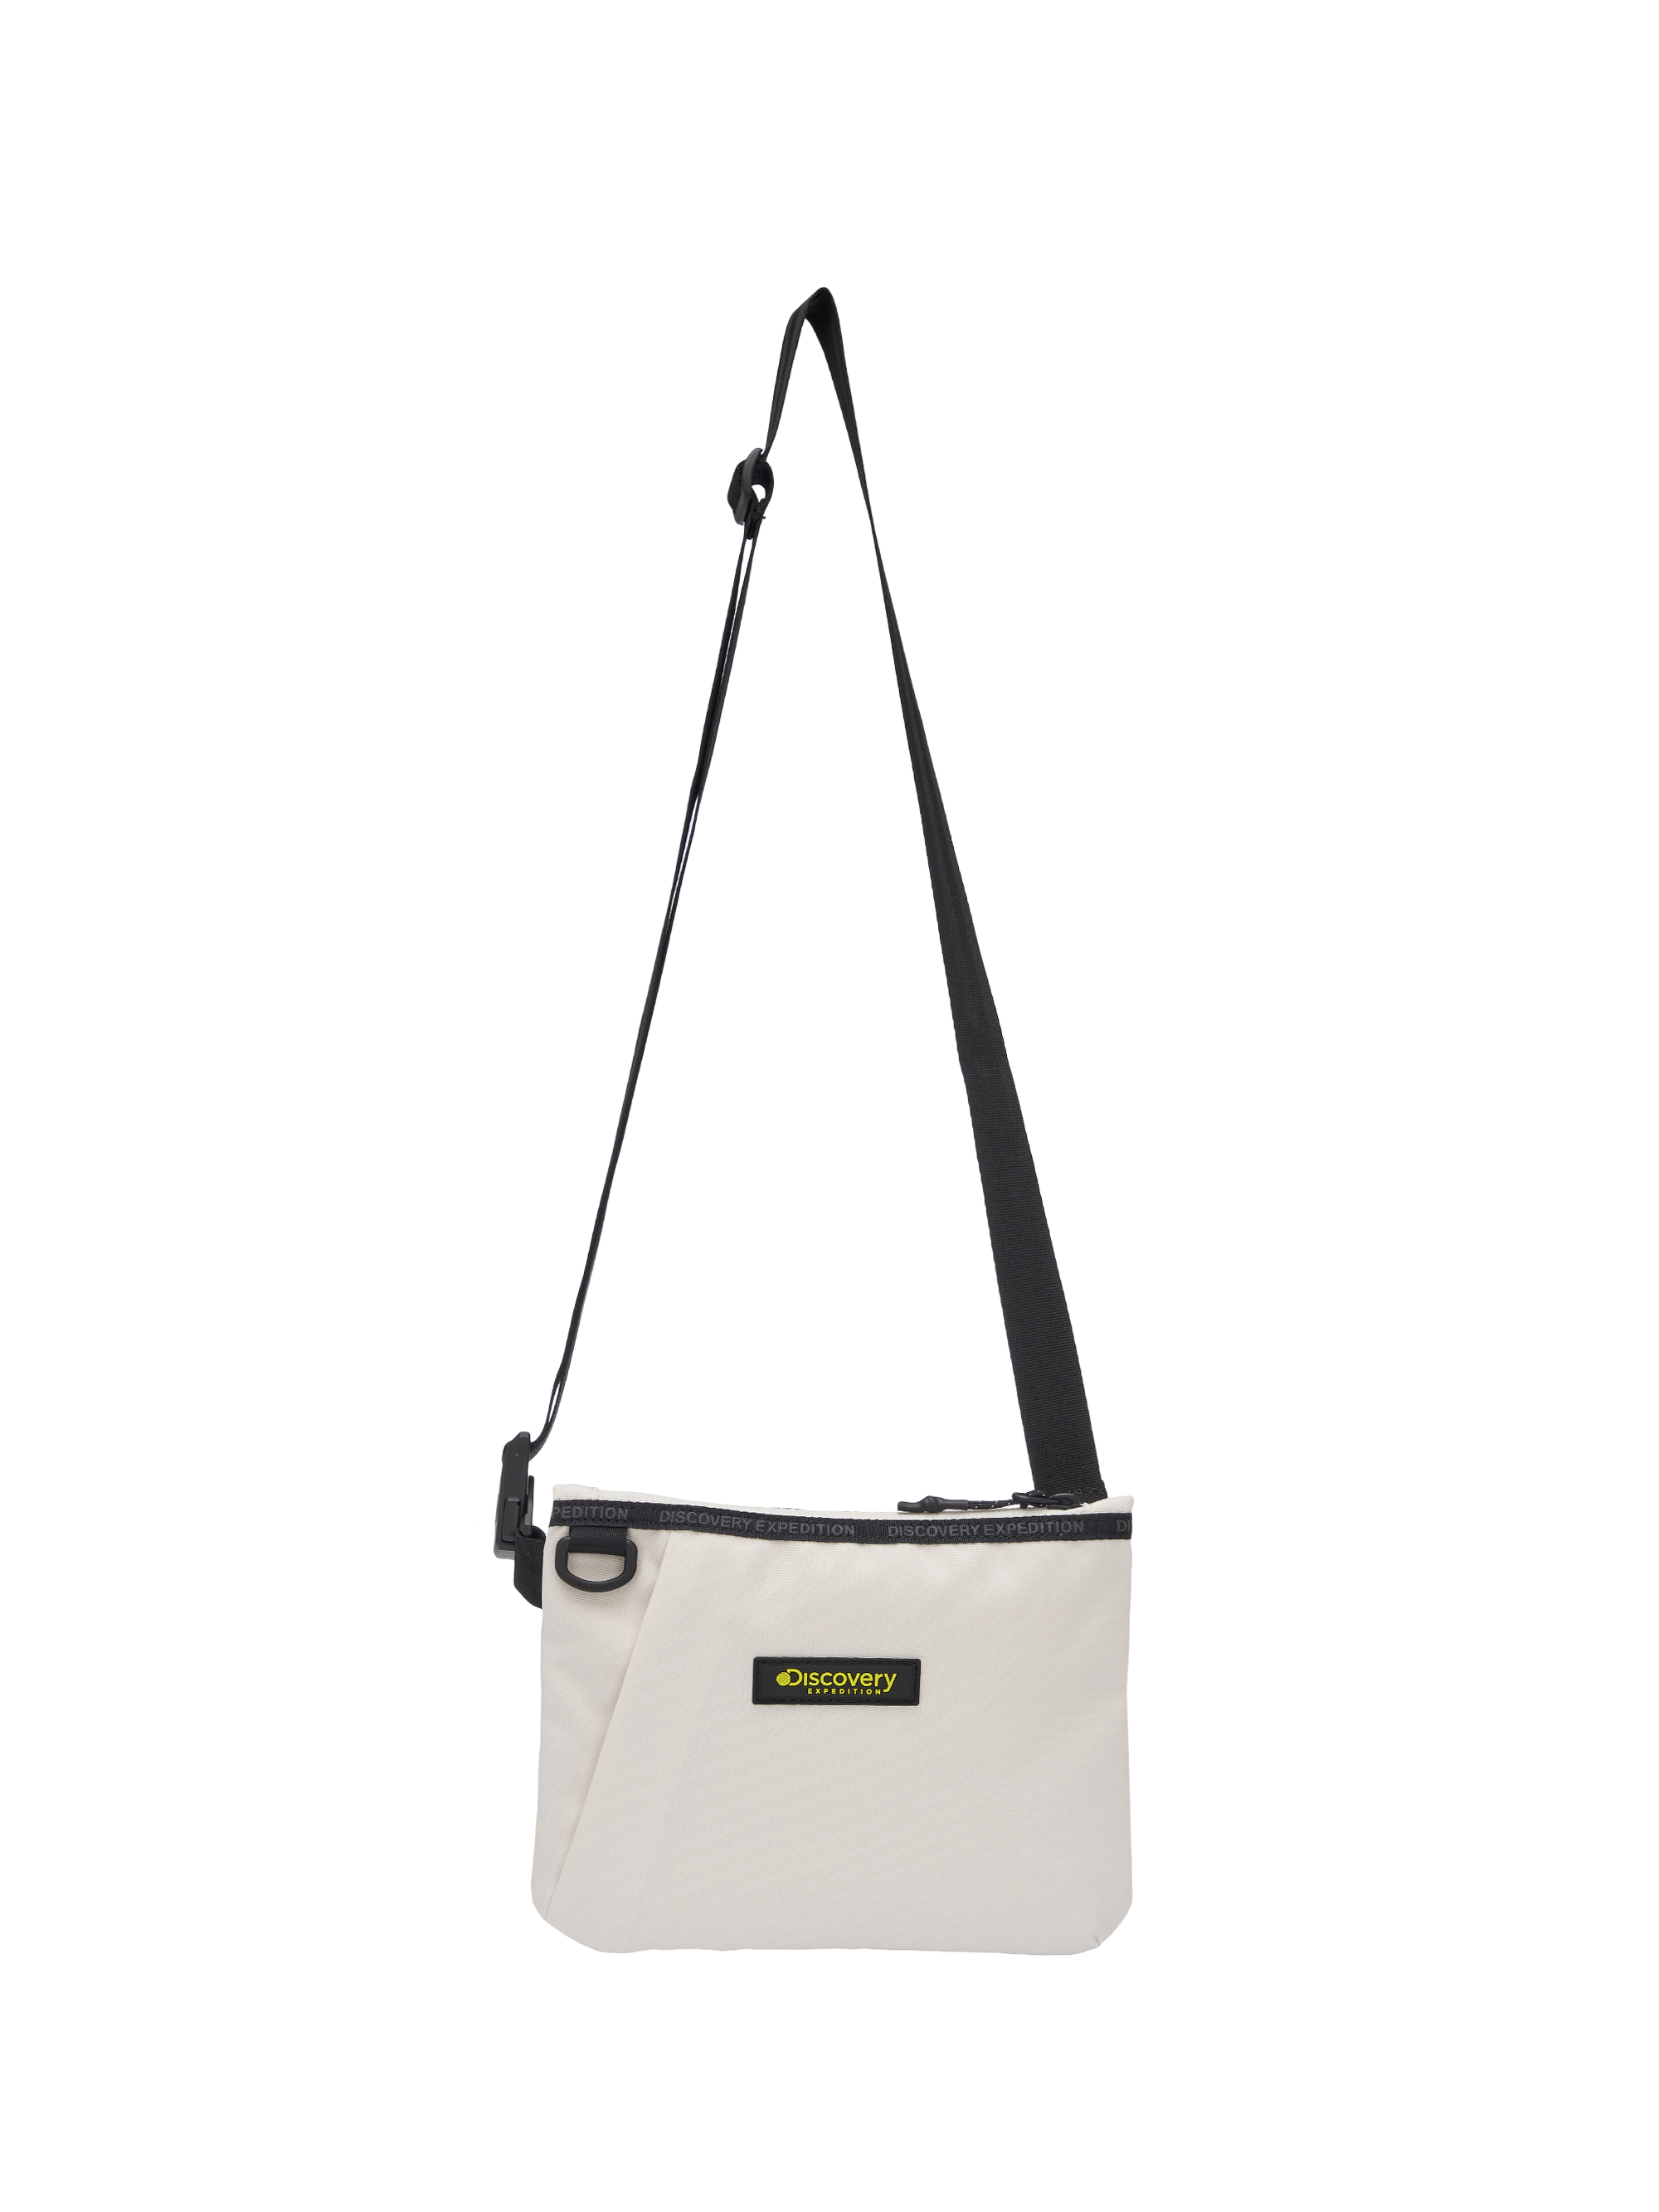 DISCOVERY EXPEDITION CROSSBODY BAG